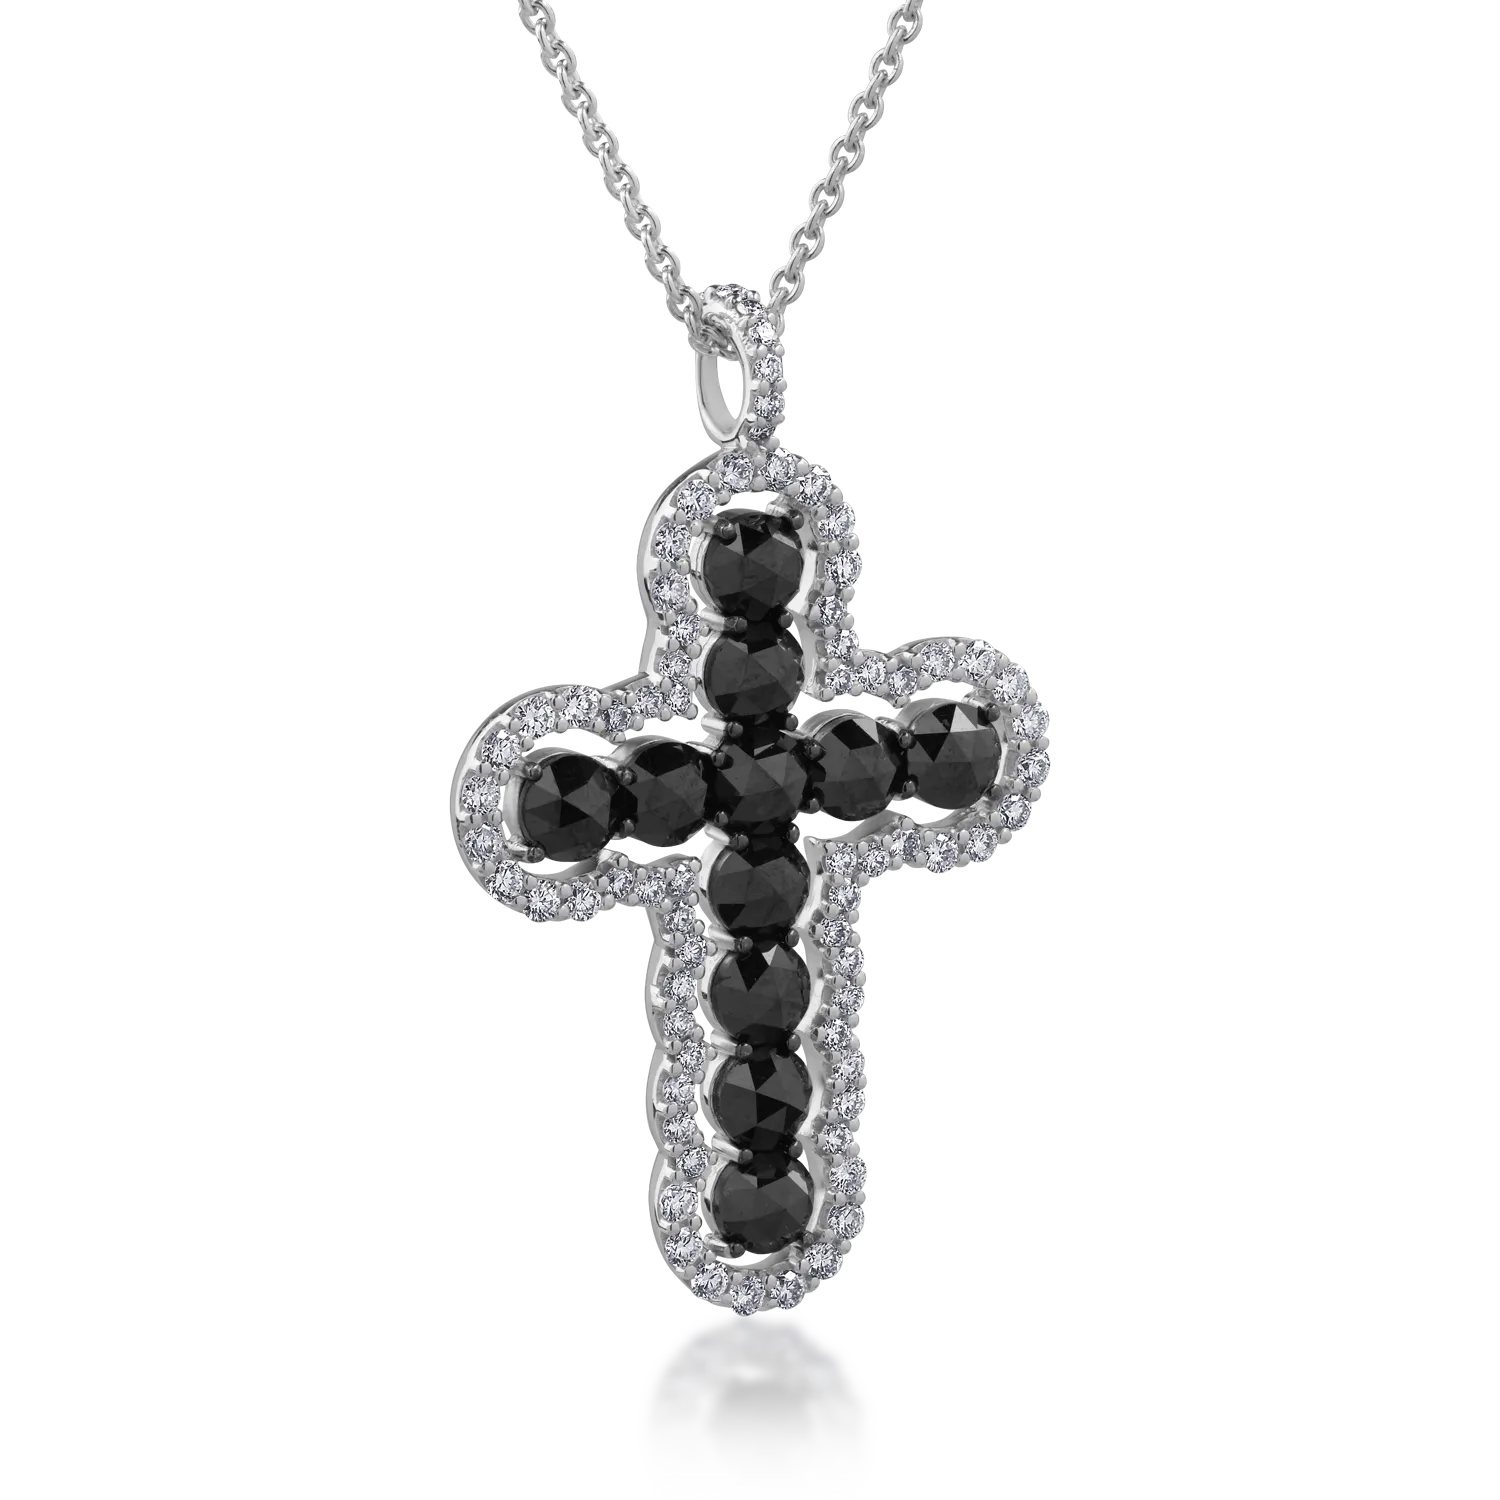 18K white gold cross pendant necklace with 1.9ct black diamonds and 0.5ct clear diamonds